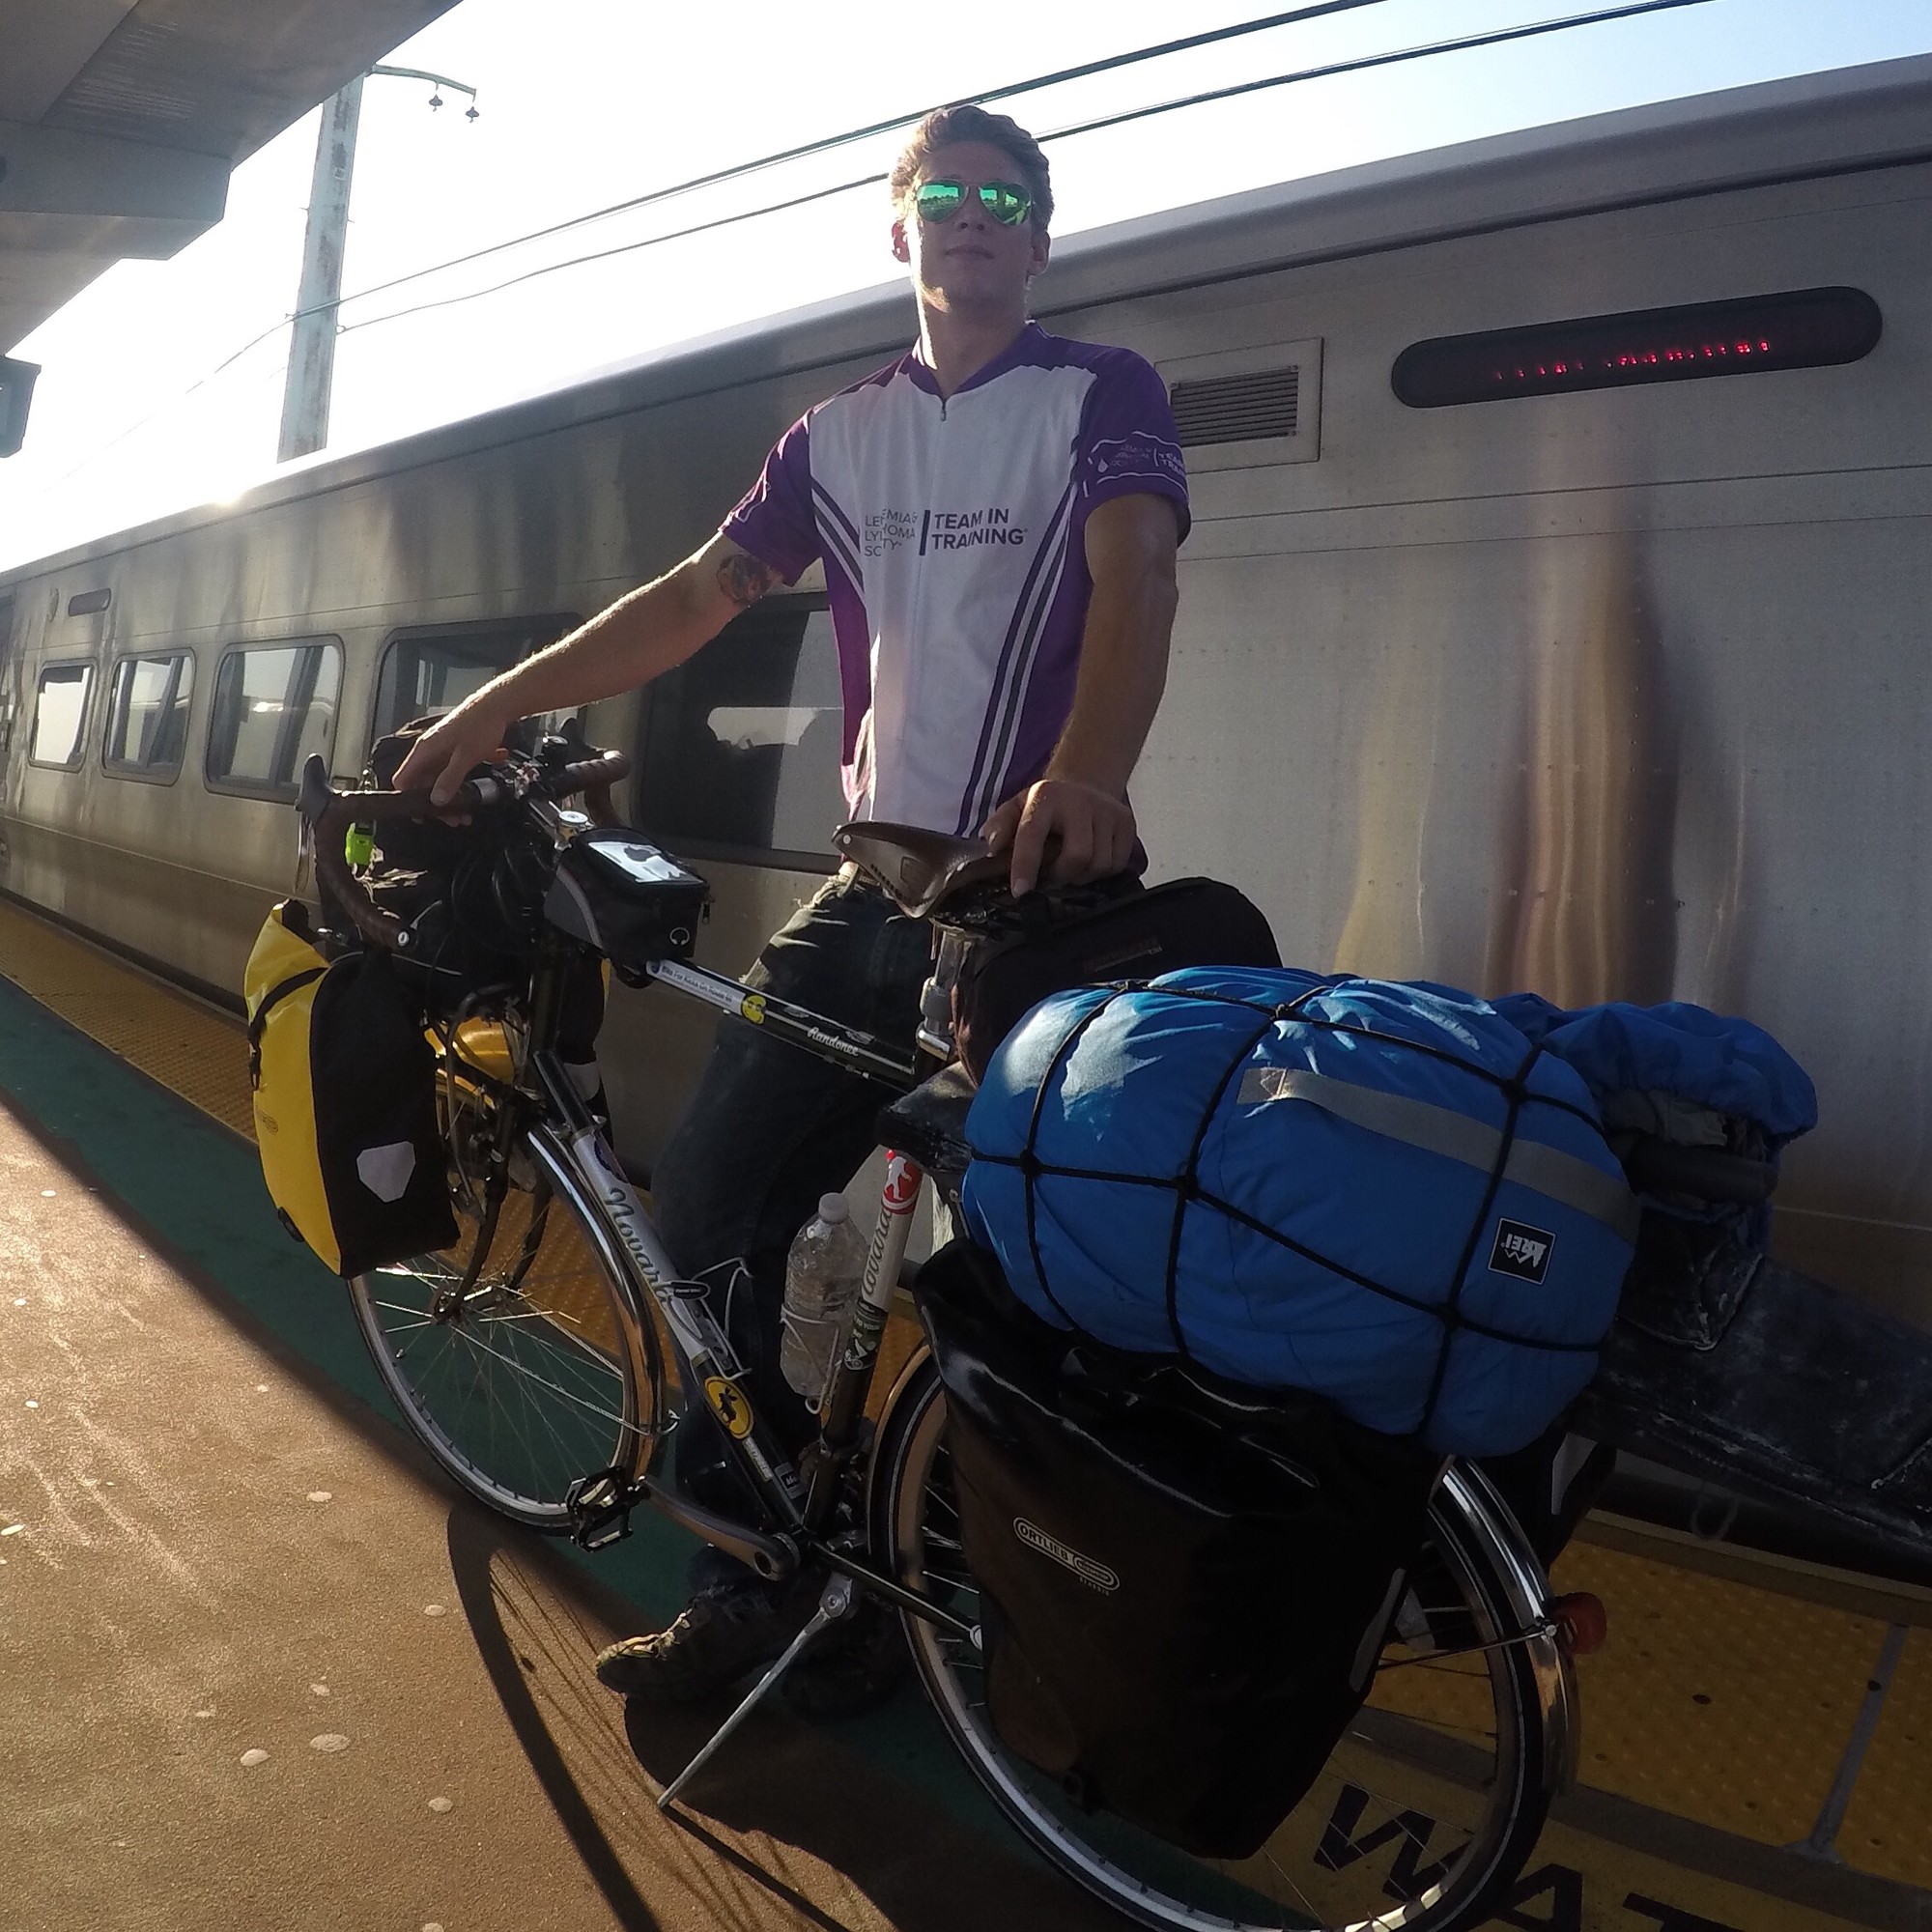 A.J. Borowski, 25, of Bellmore, began his journey across America by traveling to Virginia on Aug. 30. Once he arrived, he started his ride on U.S. Bicycle Route 76.